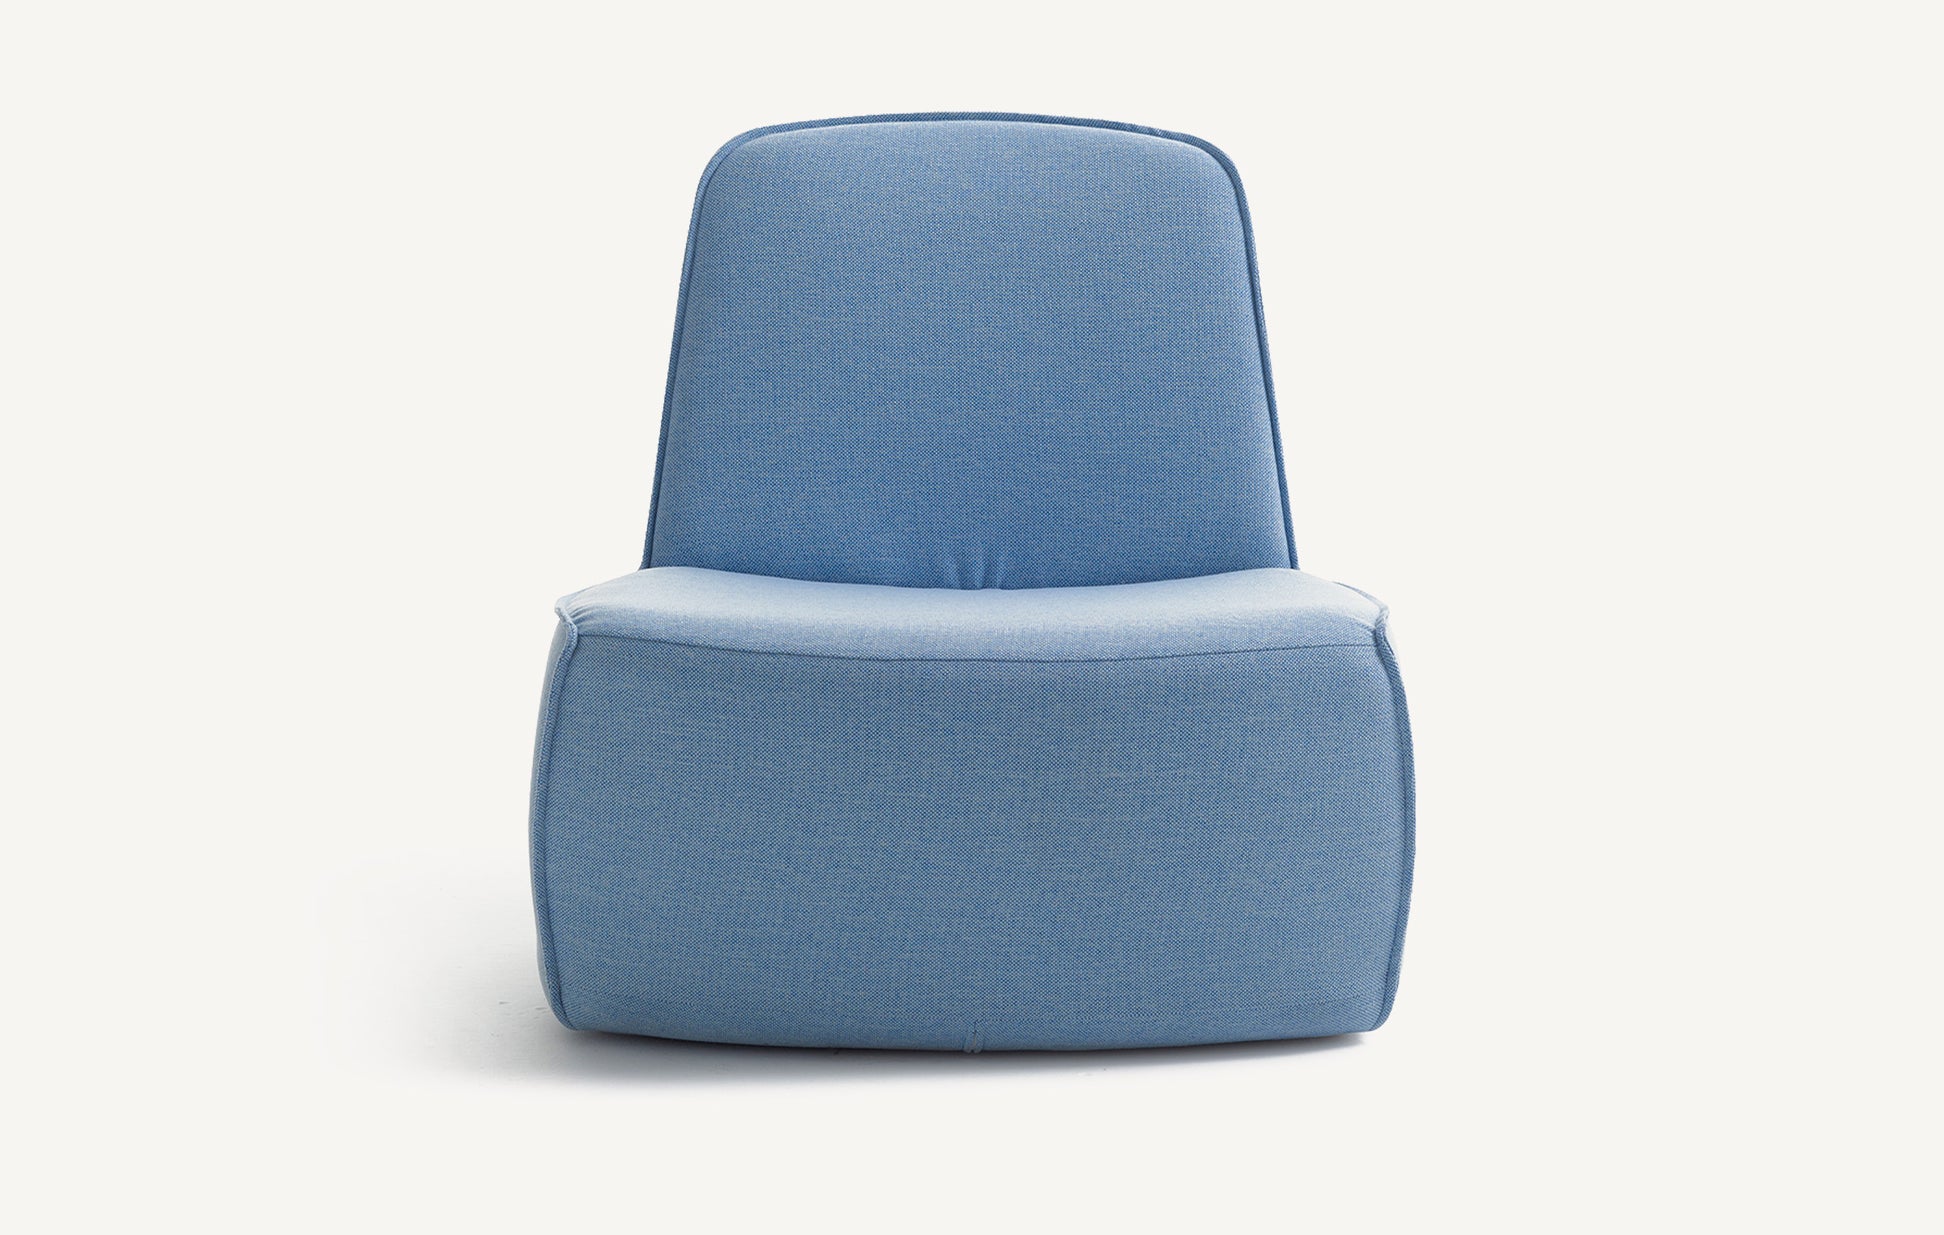 htbk040 breck lounge swivel 06 <p>the breck collection includes seating, tables, and benches that combine playful design with incredible versatility. rounded corners and upholstered elements make breck a so and inviting addition to lounge and office spaces.</p> <ul> <li>available in multiple textiles including vinyl and leather </li> <li>available in multiple configurations</li> </ul>